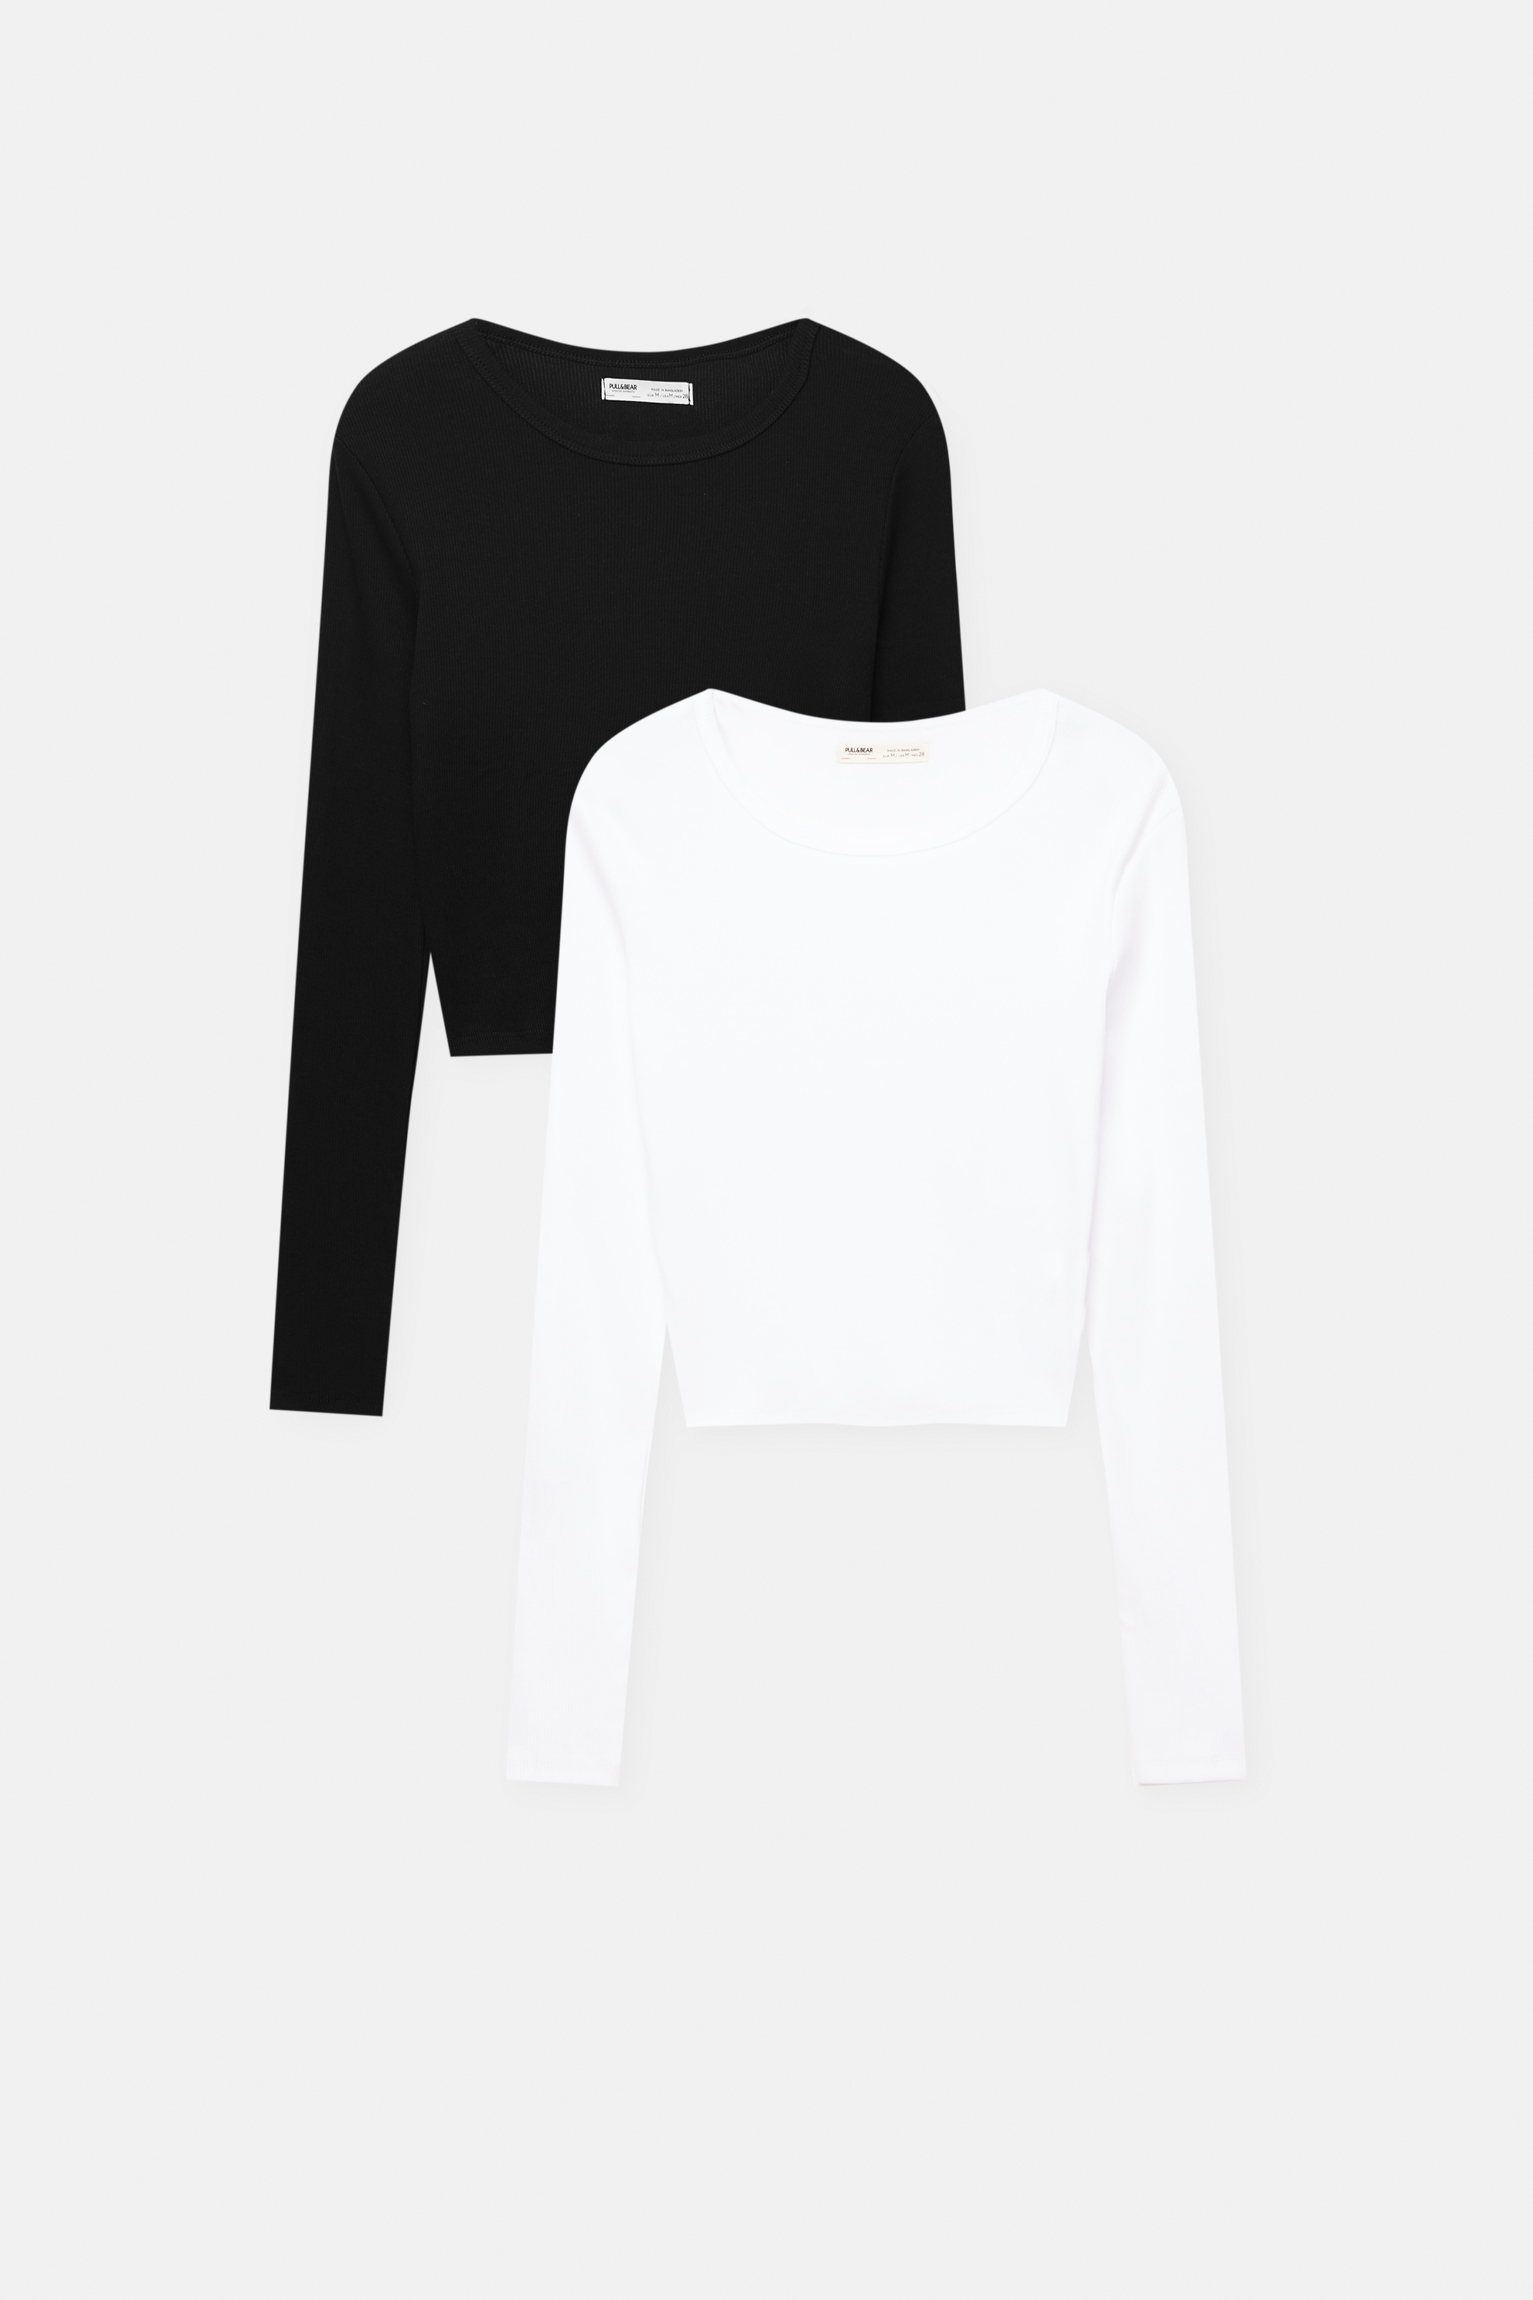 2-pack of long sleeve T-shirts - pull&bear